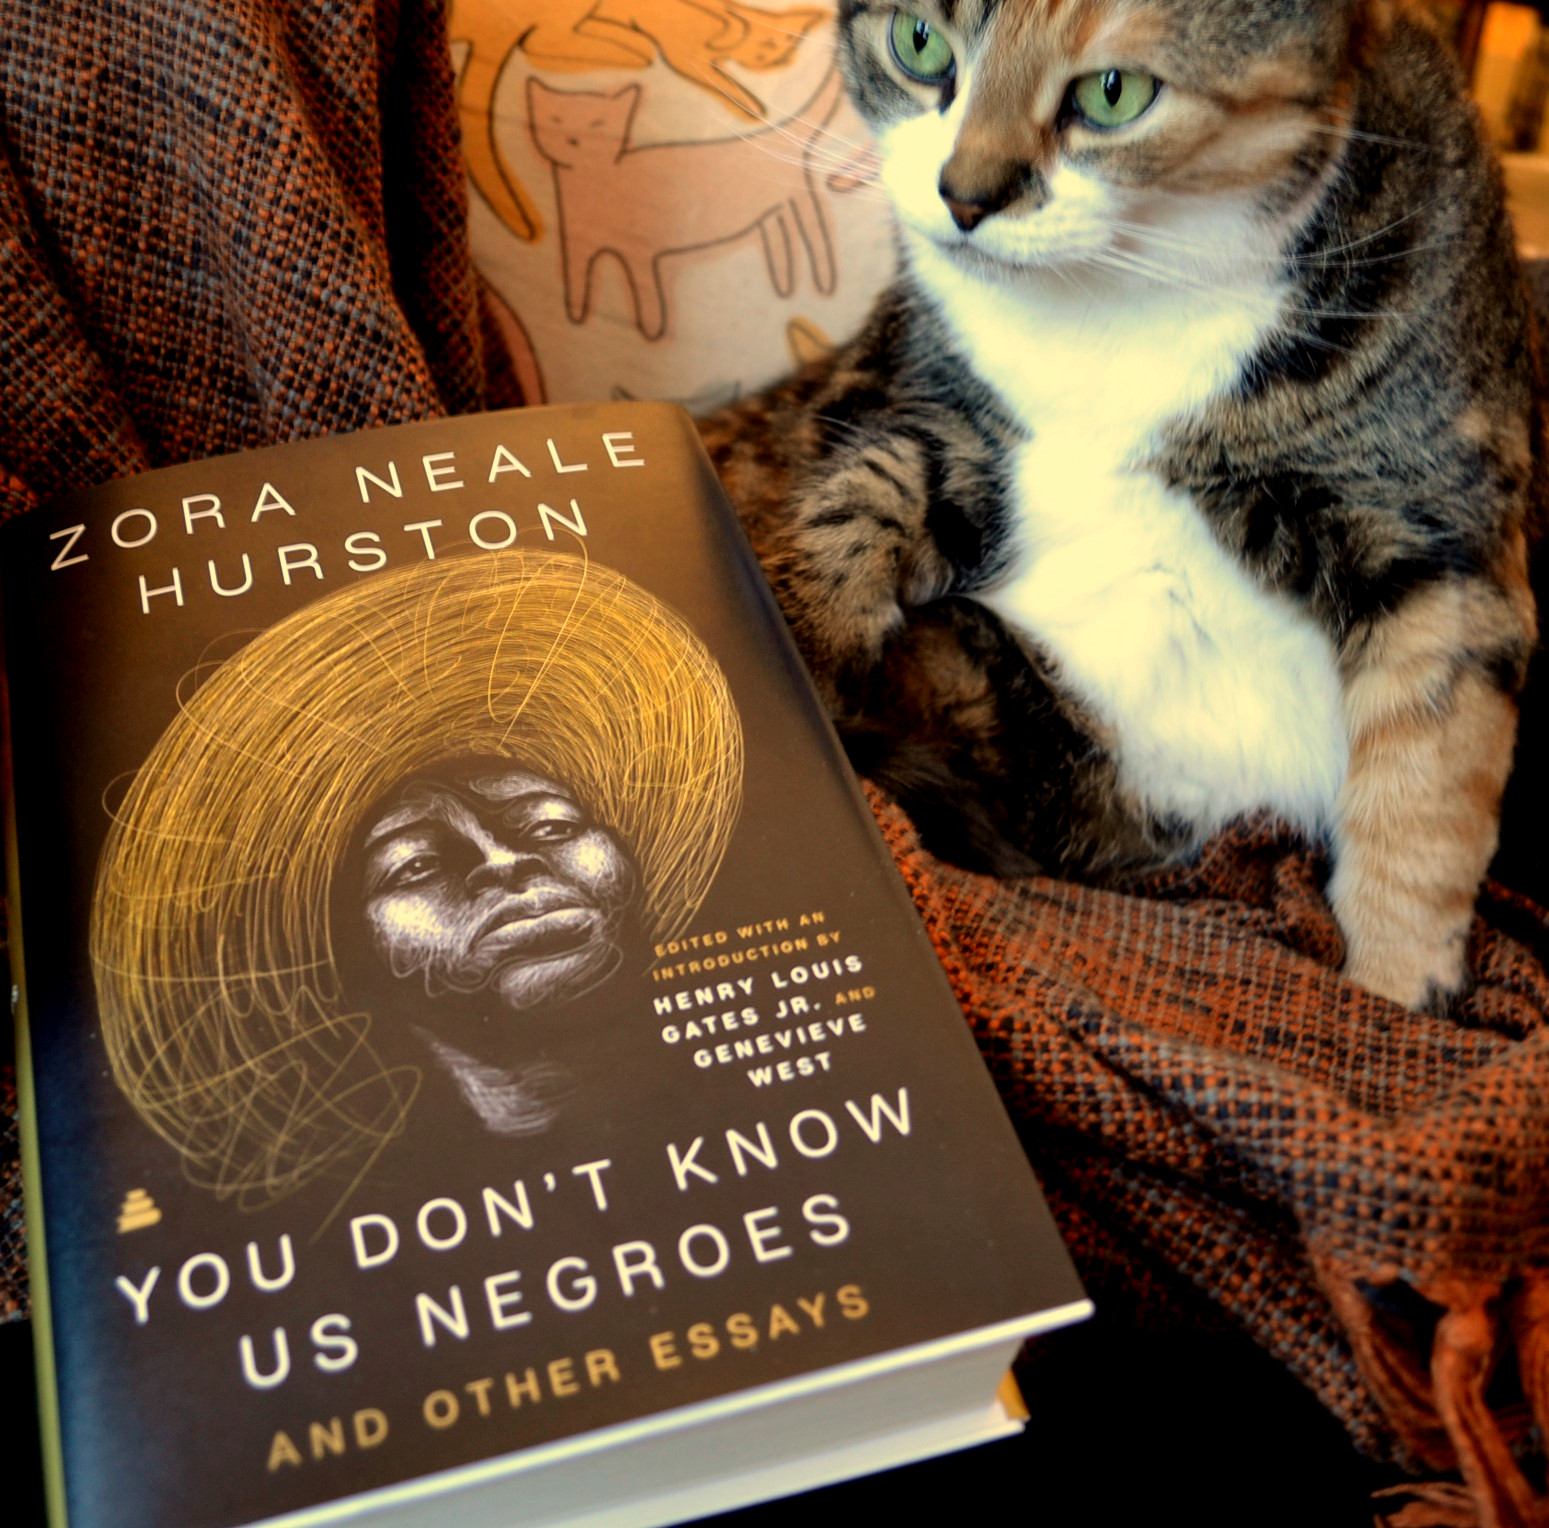 A cat sits beside a book titled 'You Don't Know Us Negroes'. The book's author is Zora Neale Hurston.